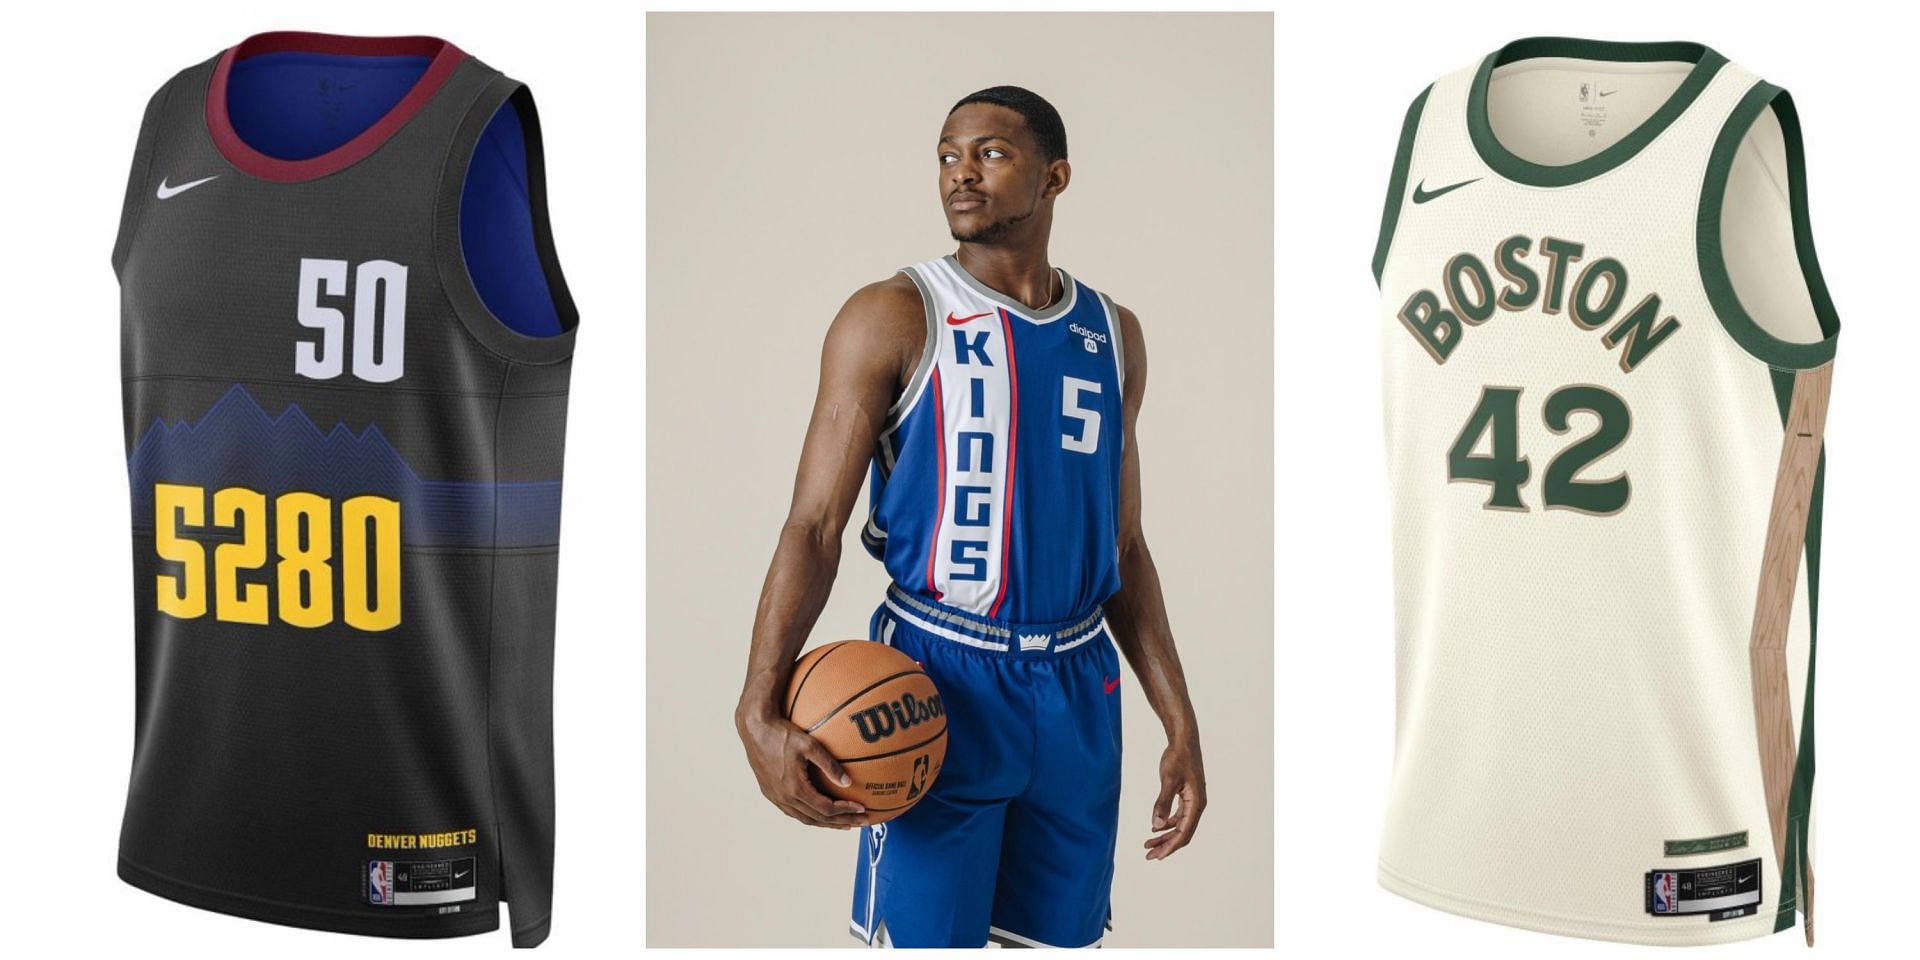 The NBAs city edition jerseys have hit the market to critical reception by fans